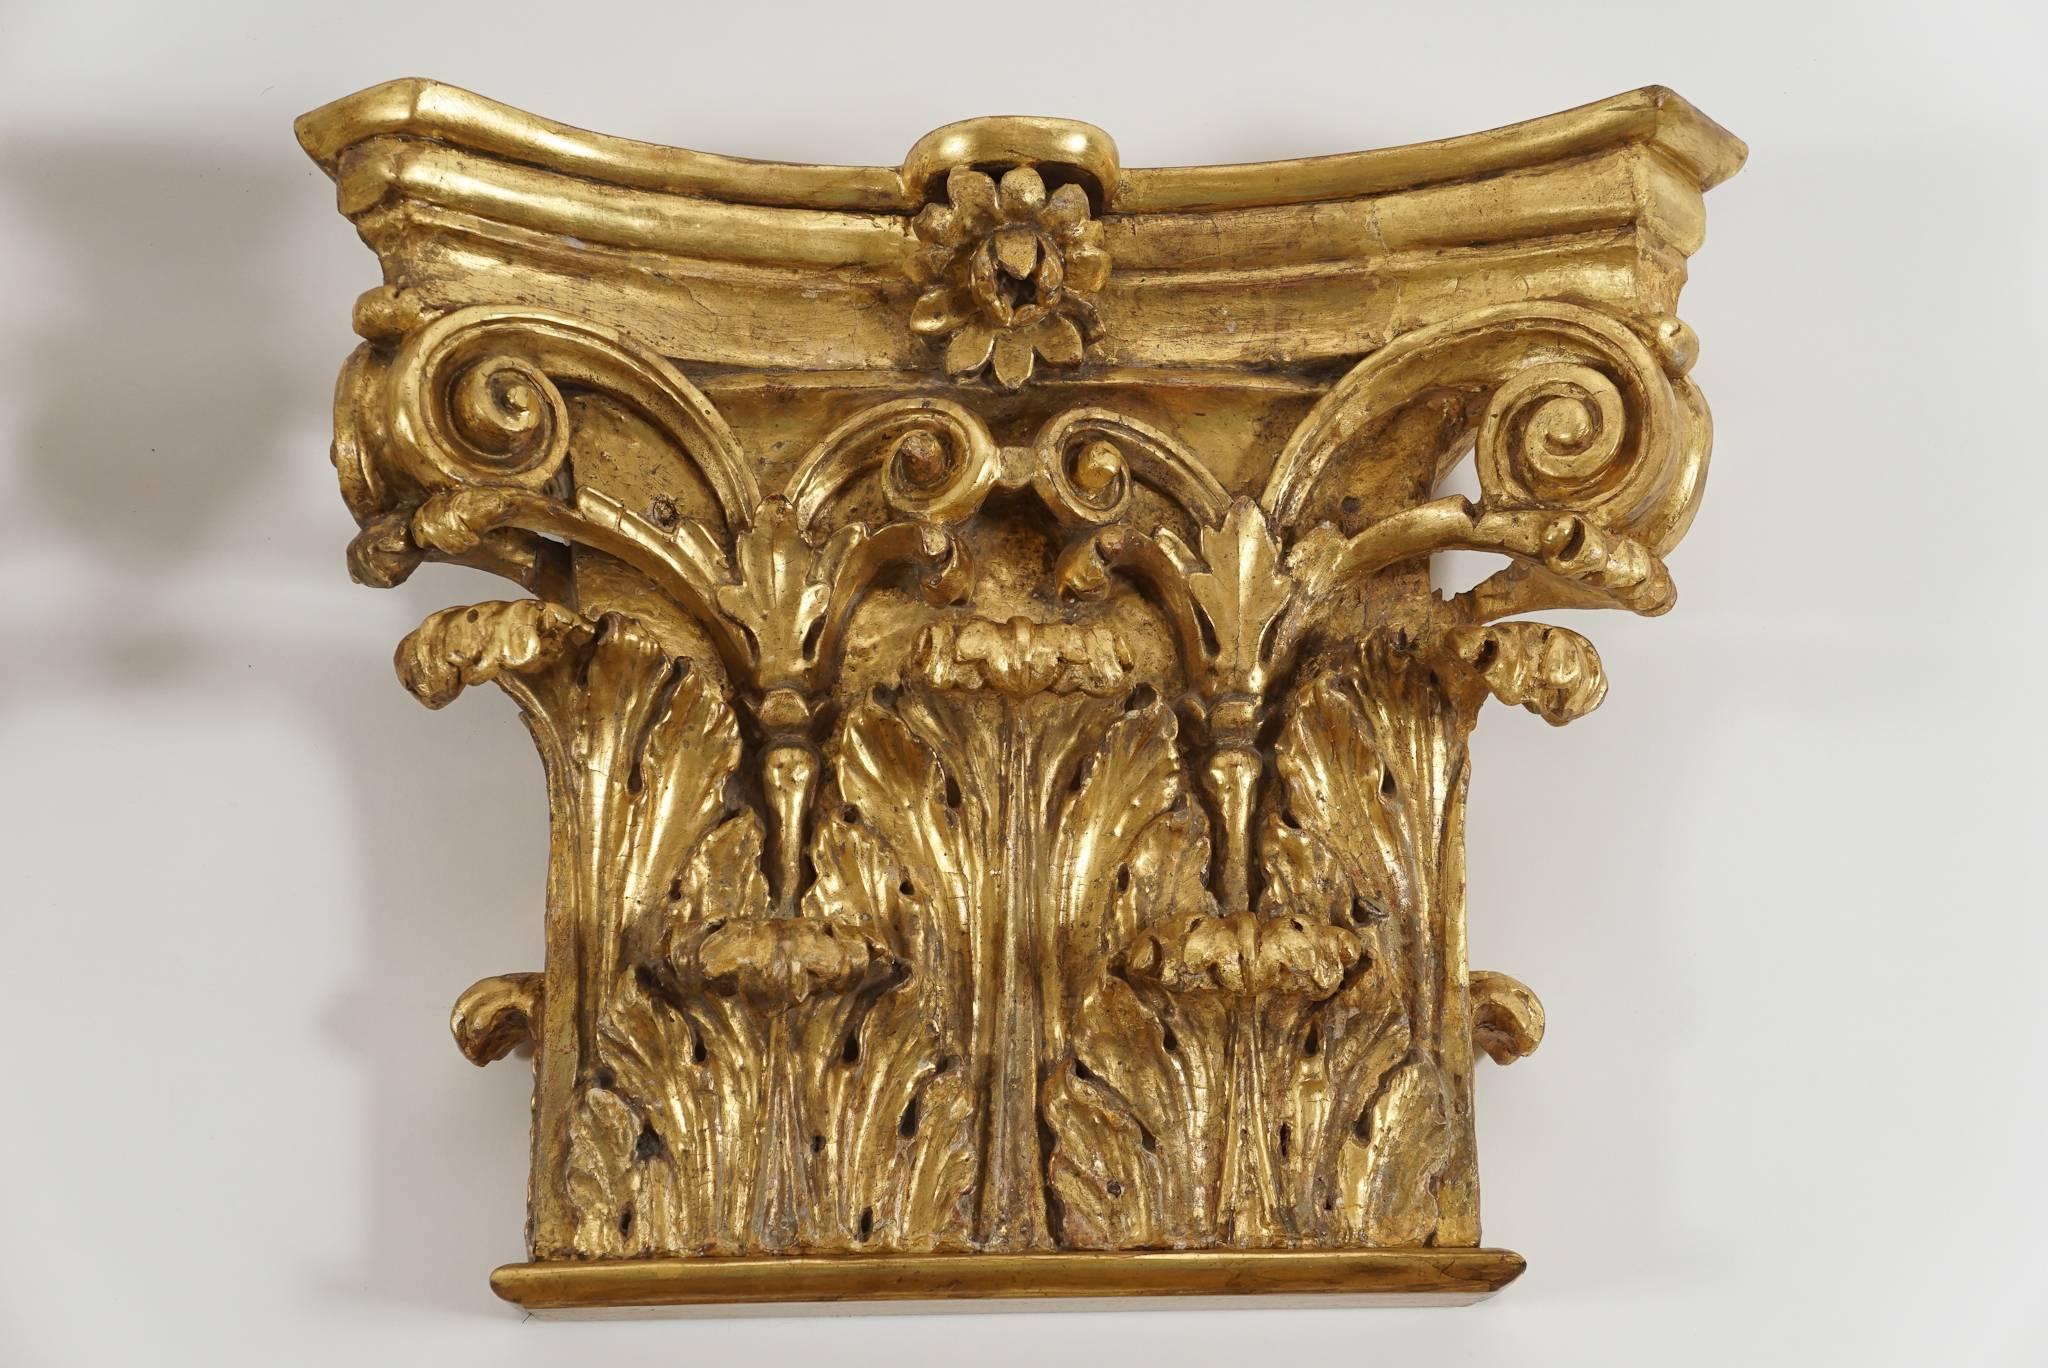 An exceptional set of four late 18th-century, English George III period carved and giltwood wall brackets of large-scale in the form of Corinthian pilaster capitals having original gilded finish.